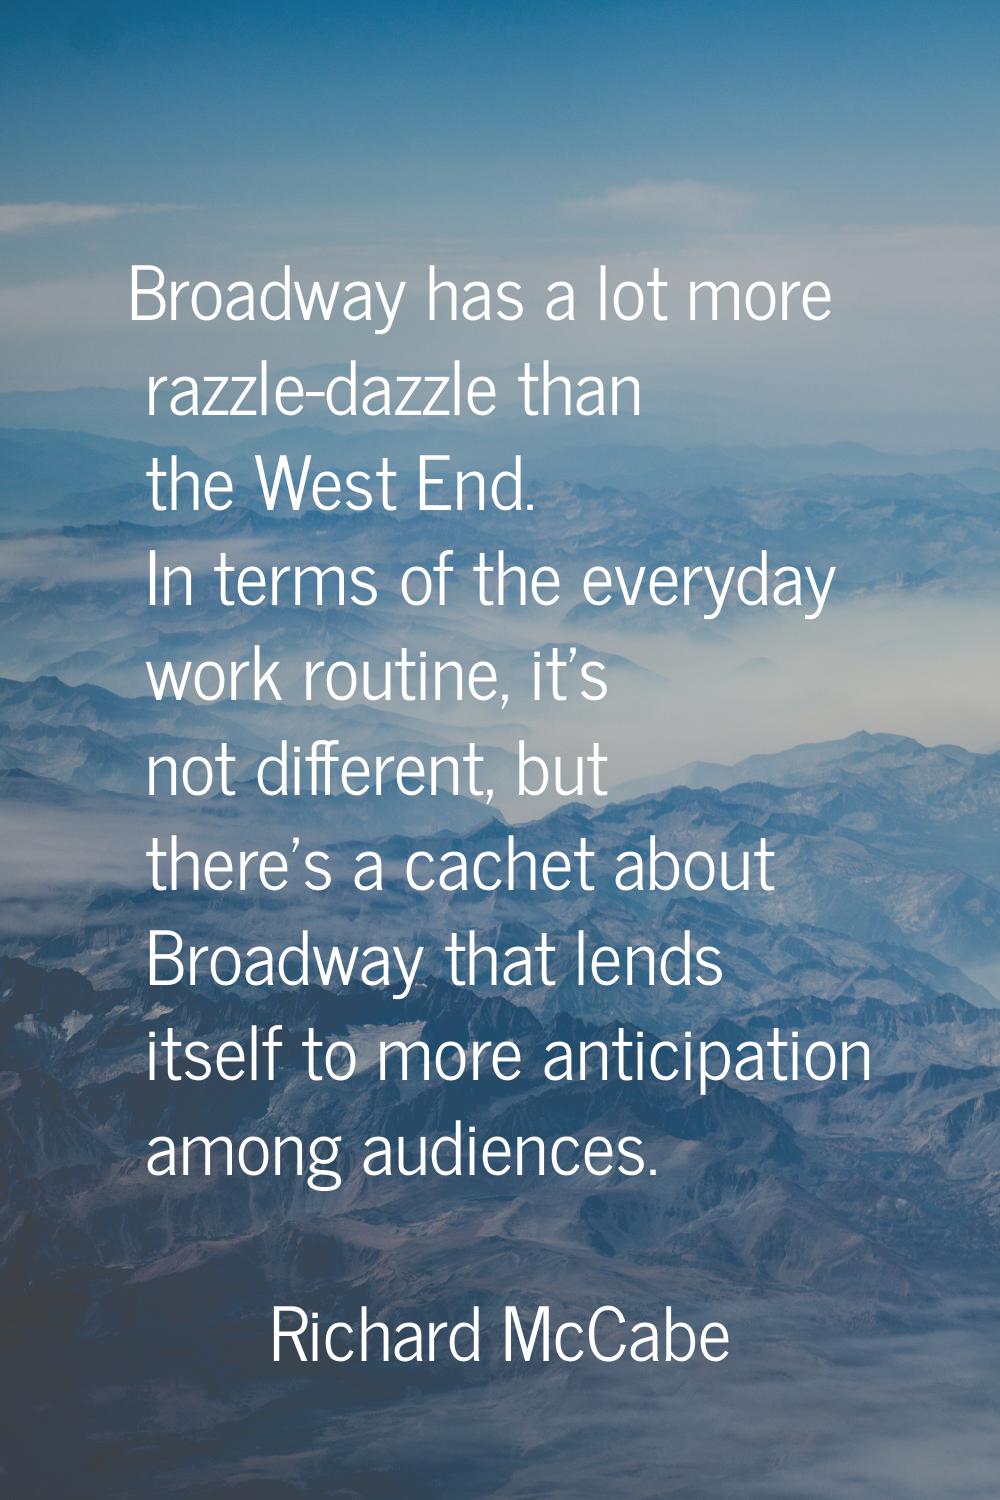 Broadway has a lot more razzle-dazzle than the West End. In terms of the everyday work routine, it'